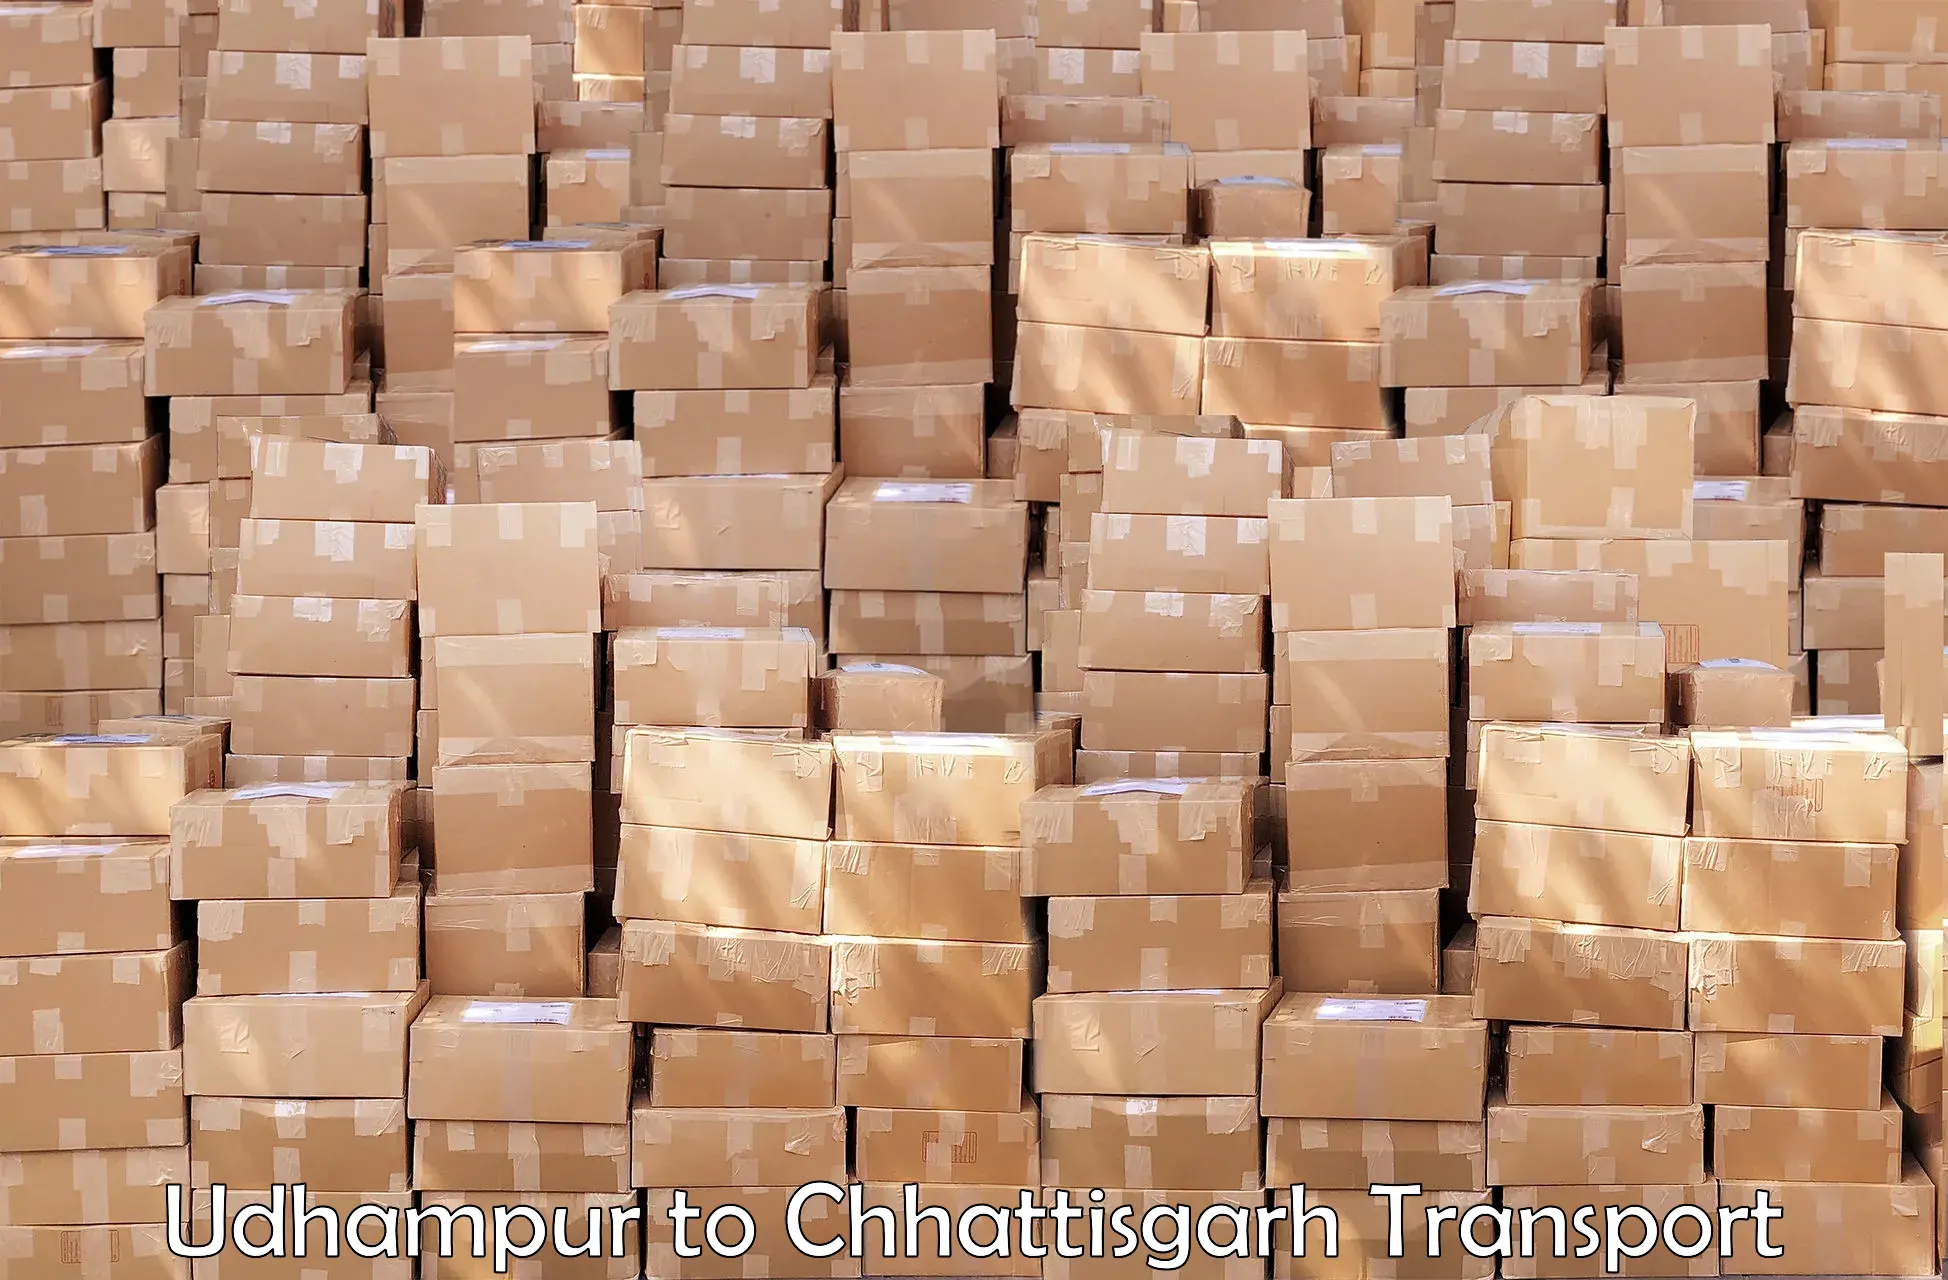 Container transport service in Udhampur to Raipur